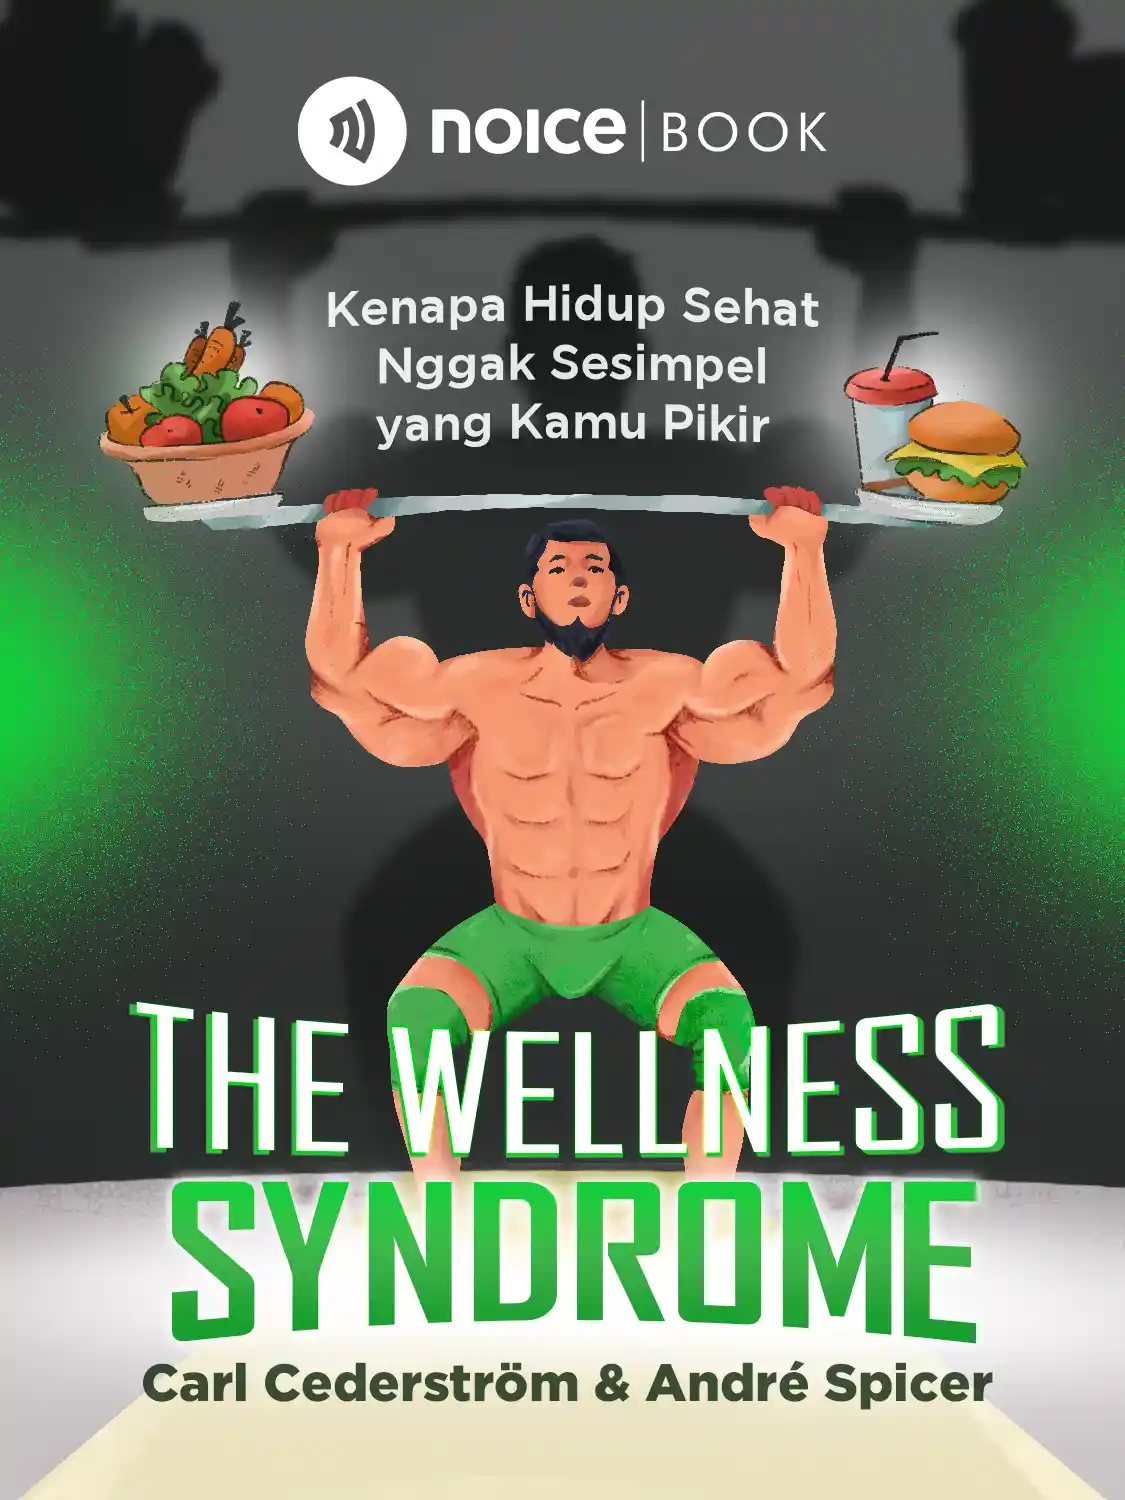 The Wellness Syndrome